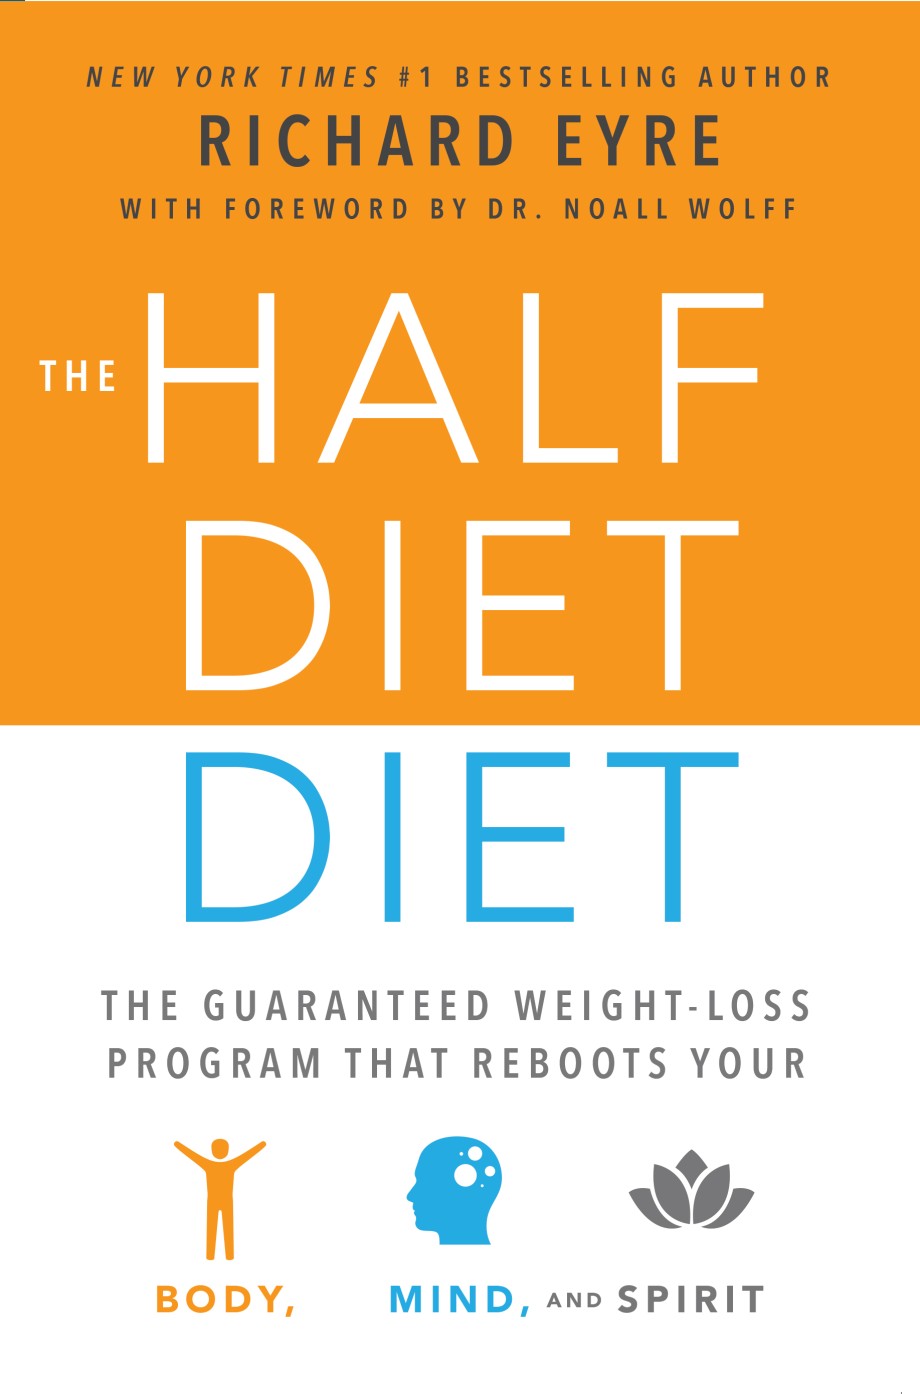 Half-Diet Diet The Guaranteed Weight-Loss Program that Reboots Your Body, Mind, and Spirit for a Happier Life